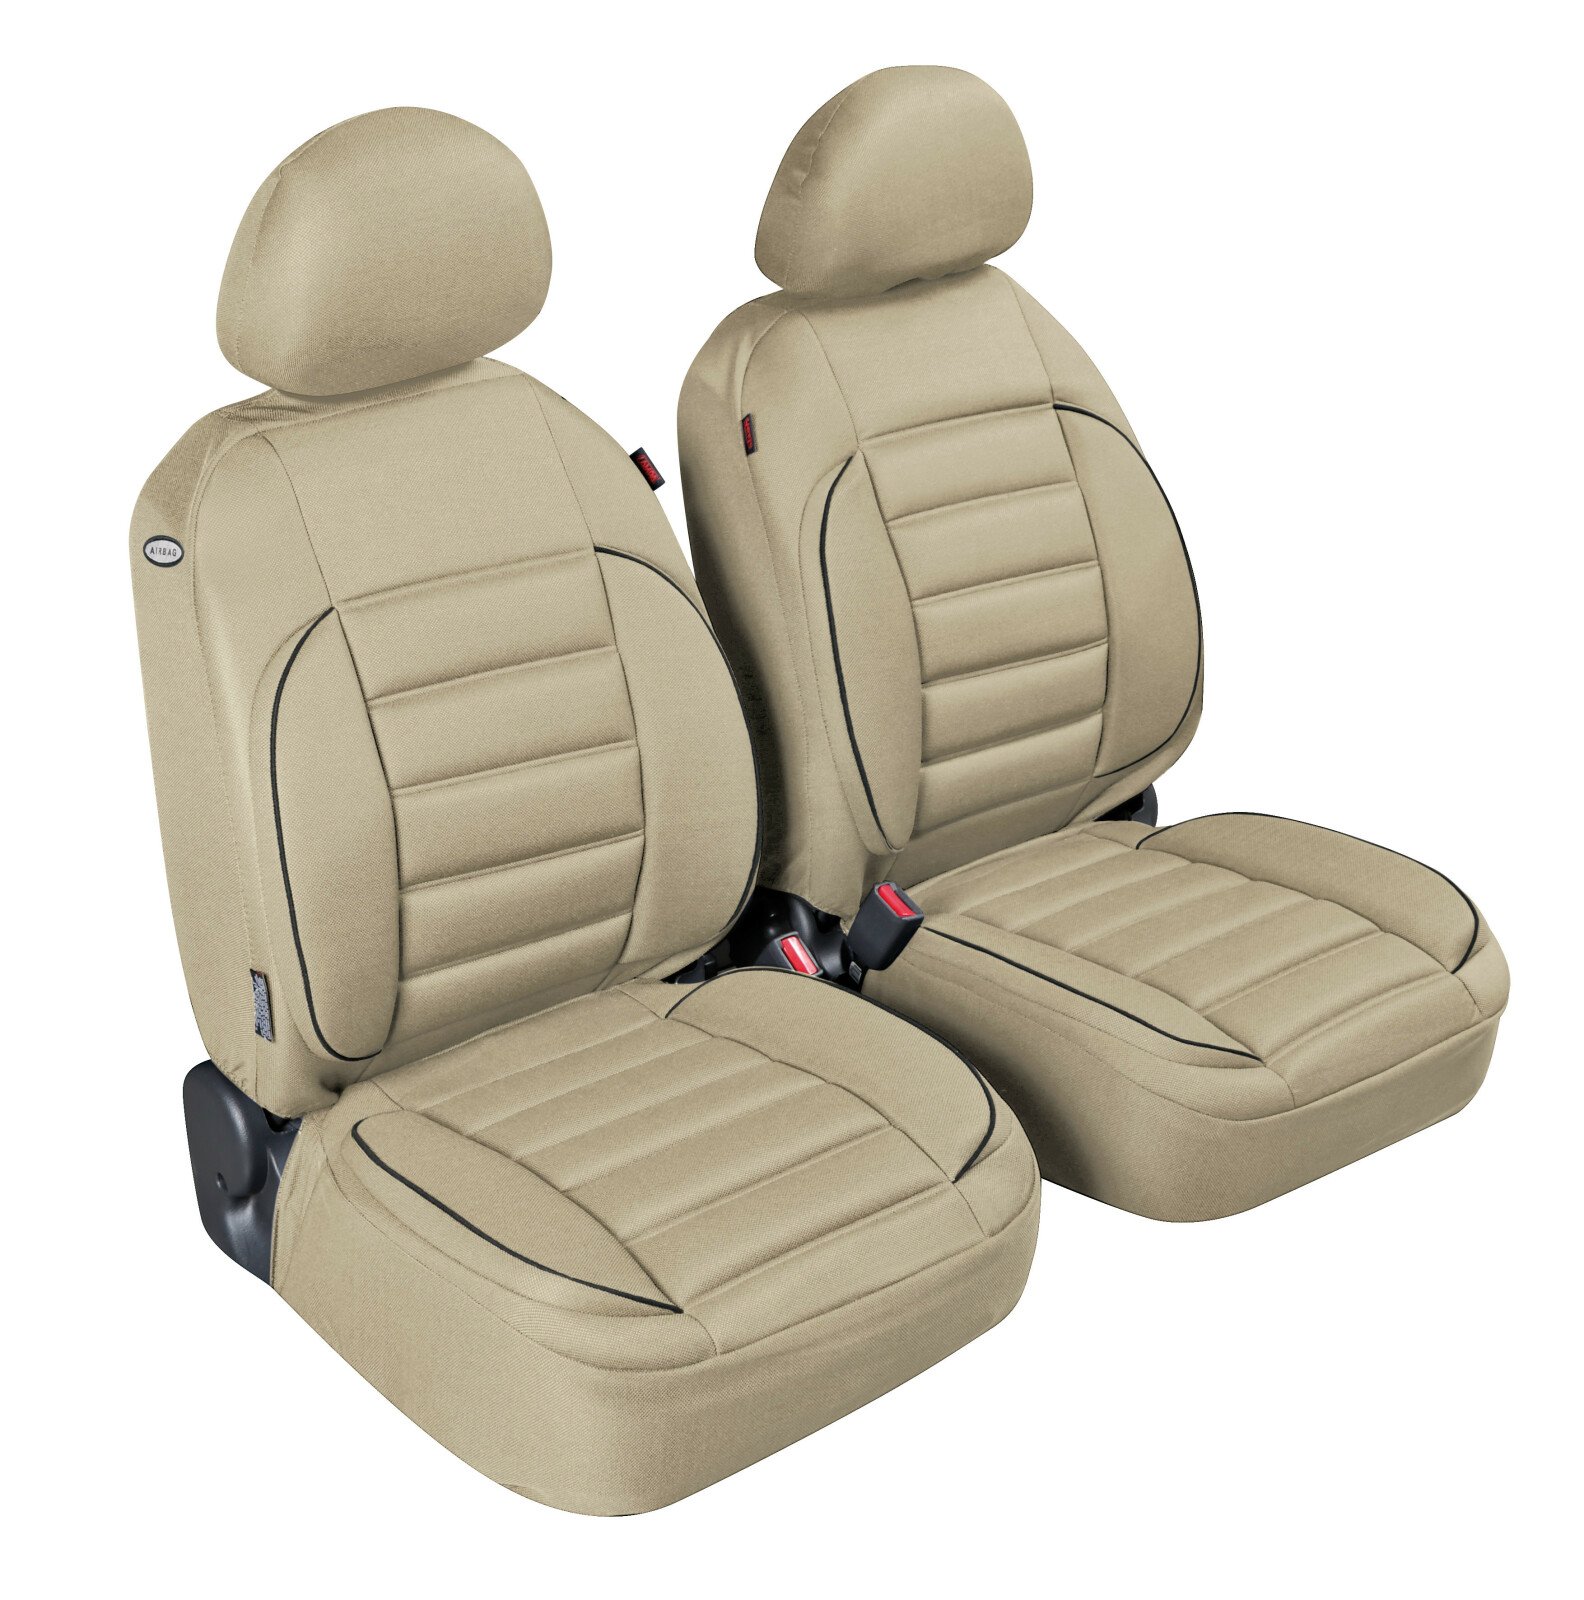 De-Luxe Sport Edition, high-quality front seat covers - Beige thumb